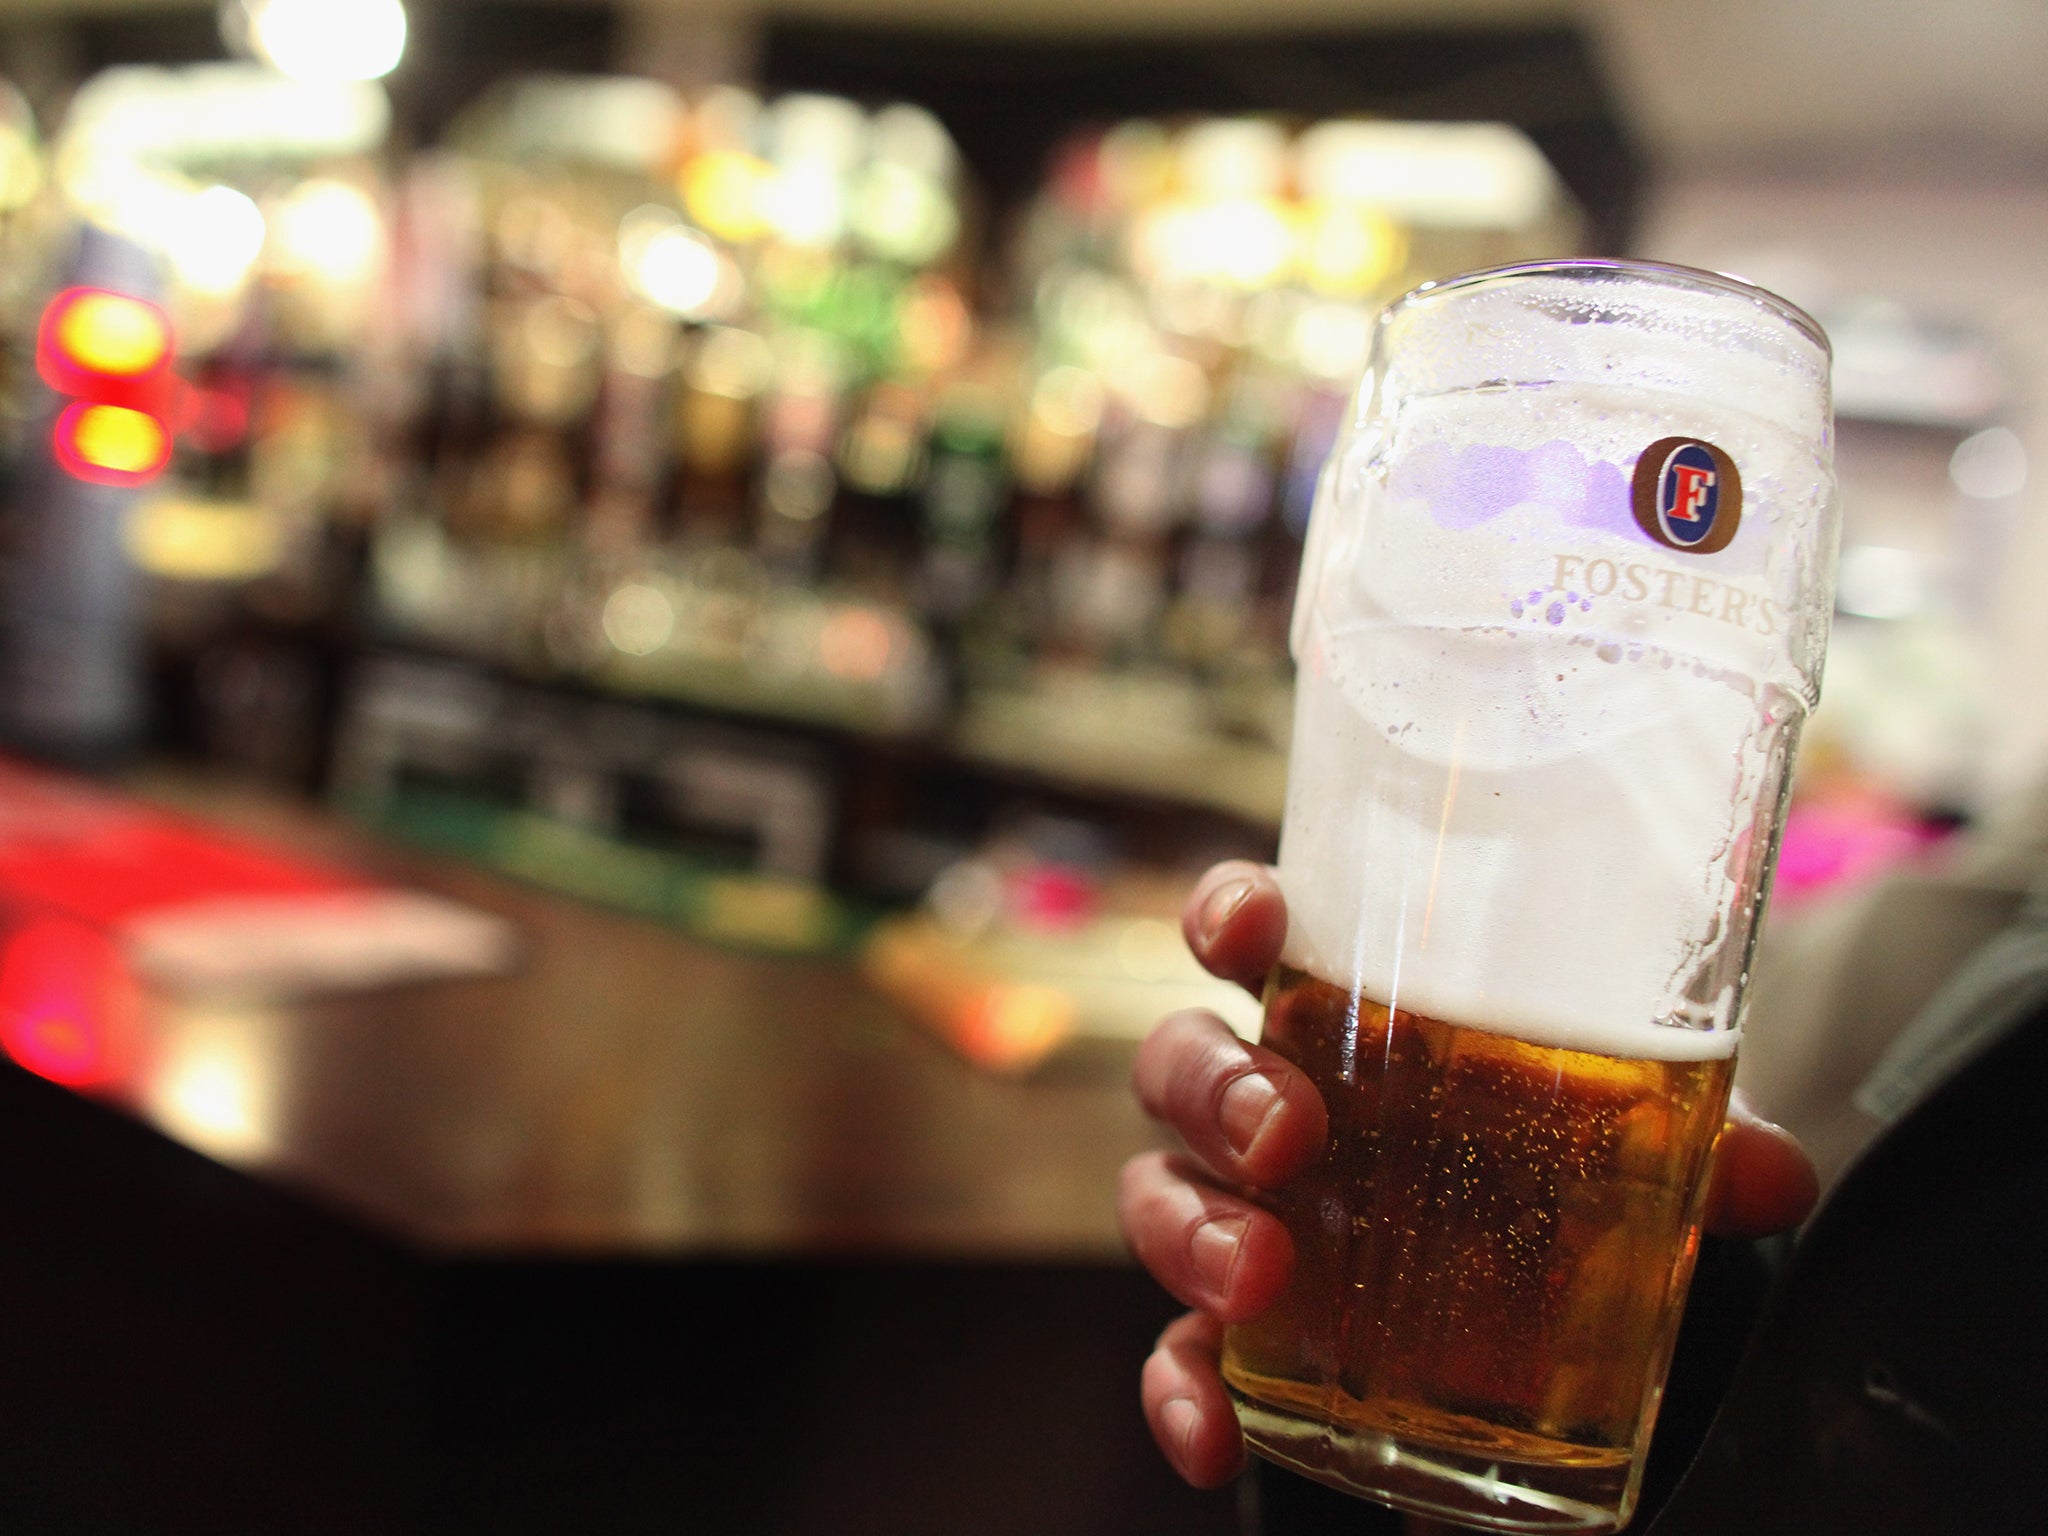 Many pubs will stay open through the night to show the results